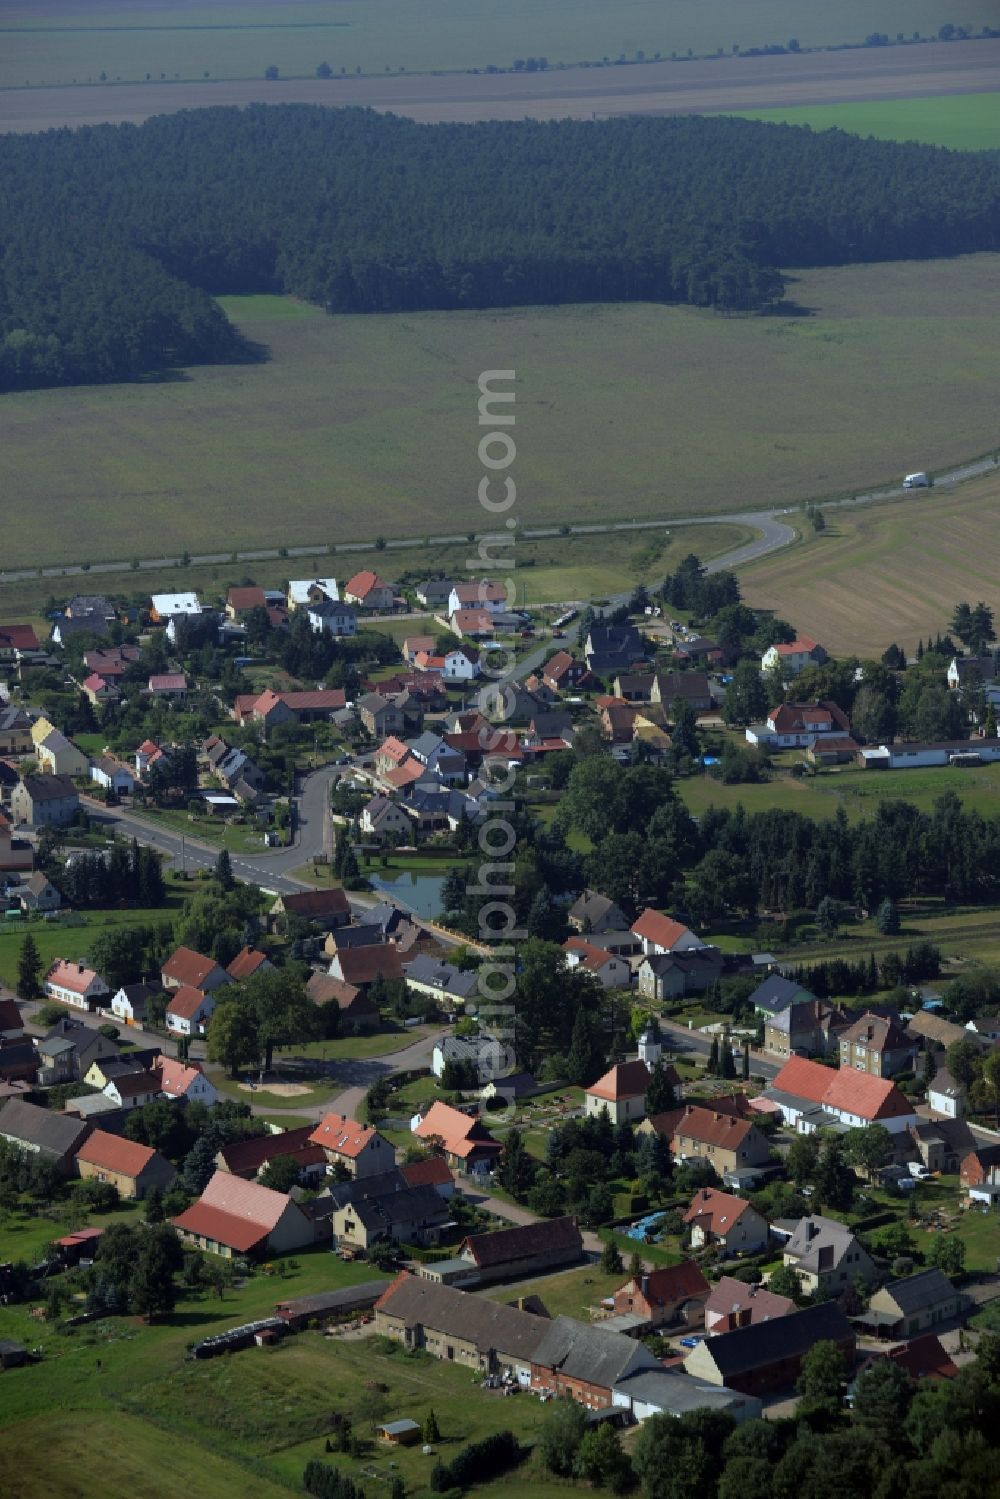 Aerial photograph Gräfenhainichen - View of the Tornau part of the town of Graefenhainichen in the state of Saxony-Anhalt. The village is located on federal highway B2 in the county district of Wittenberg and consists of single family houses and farms